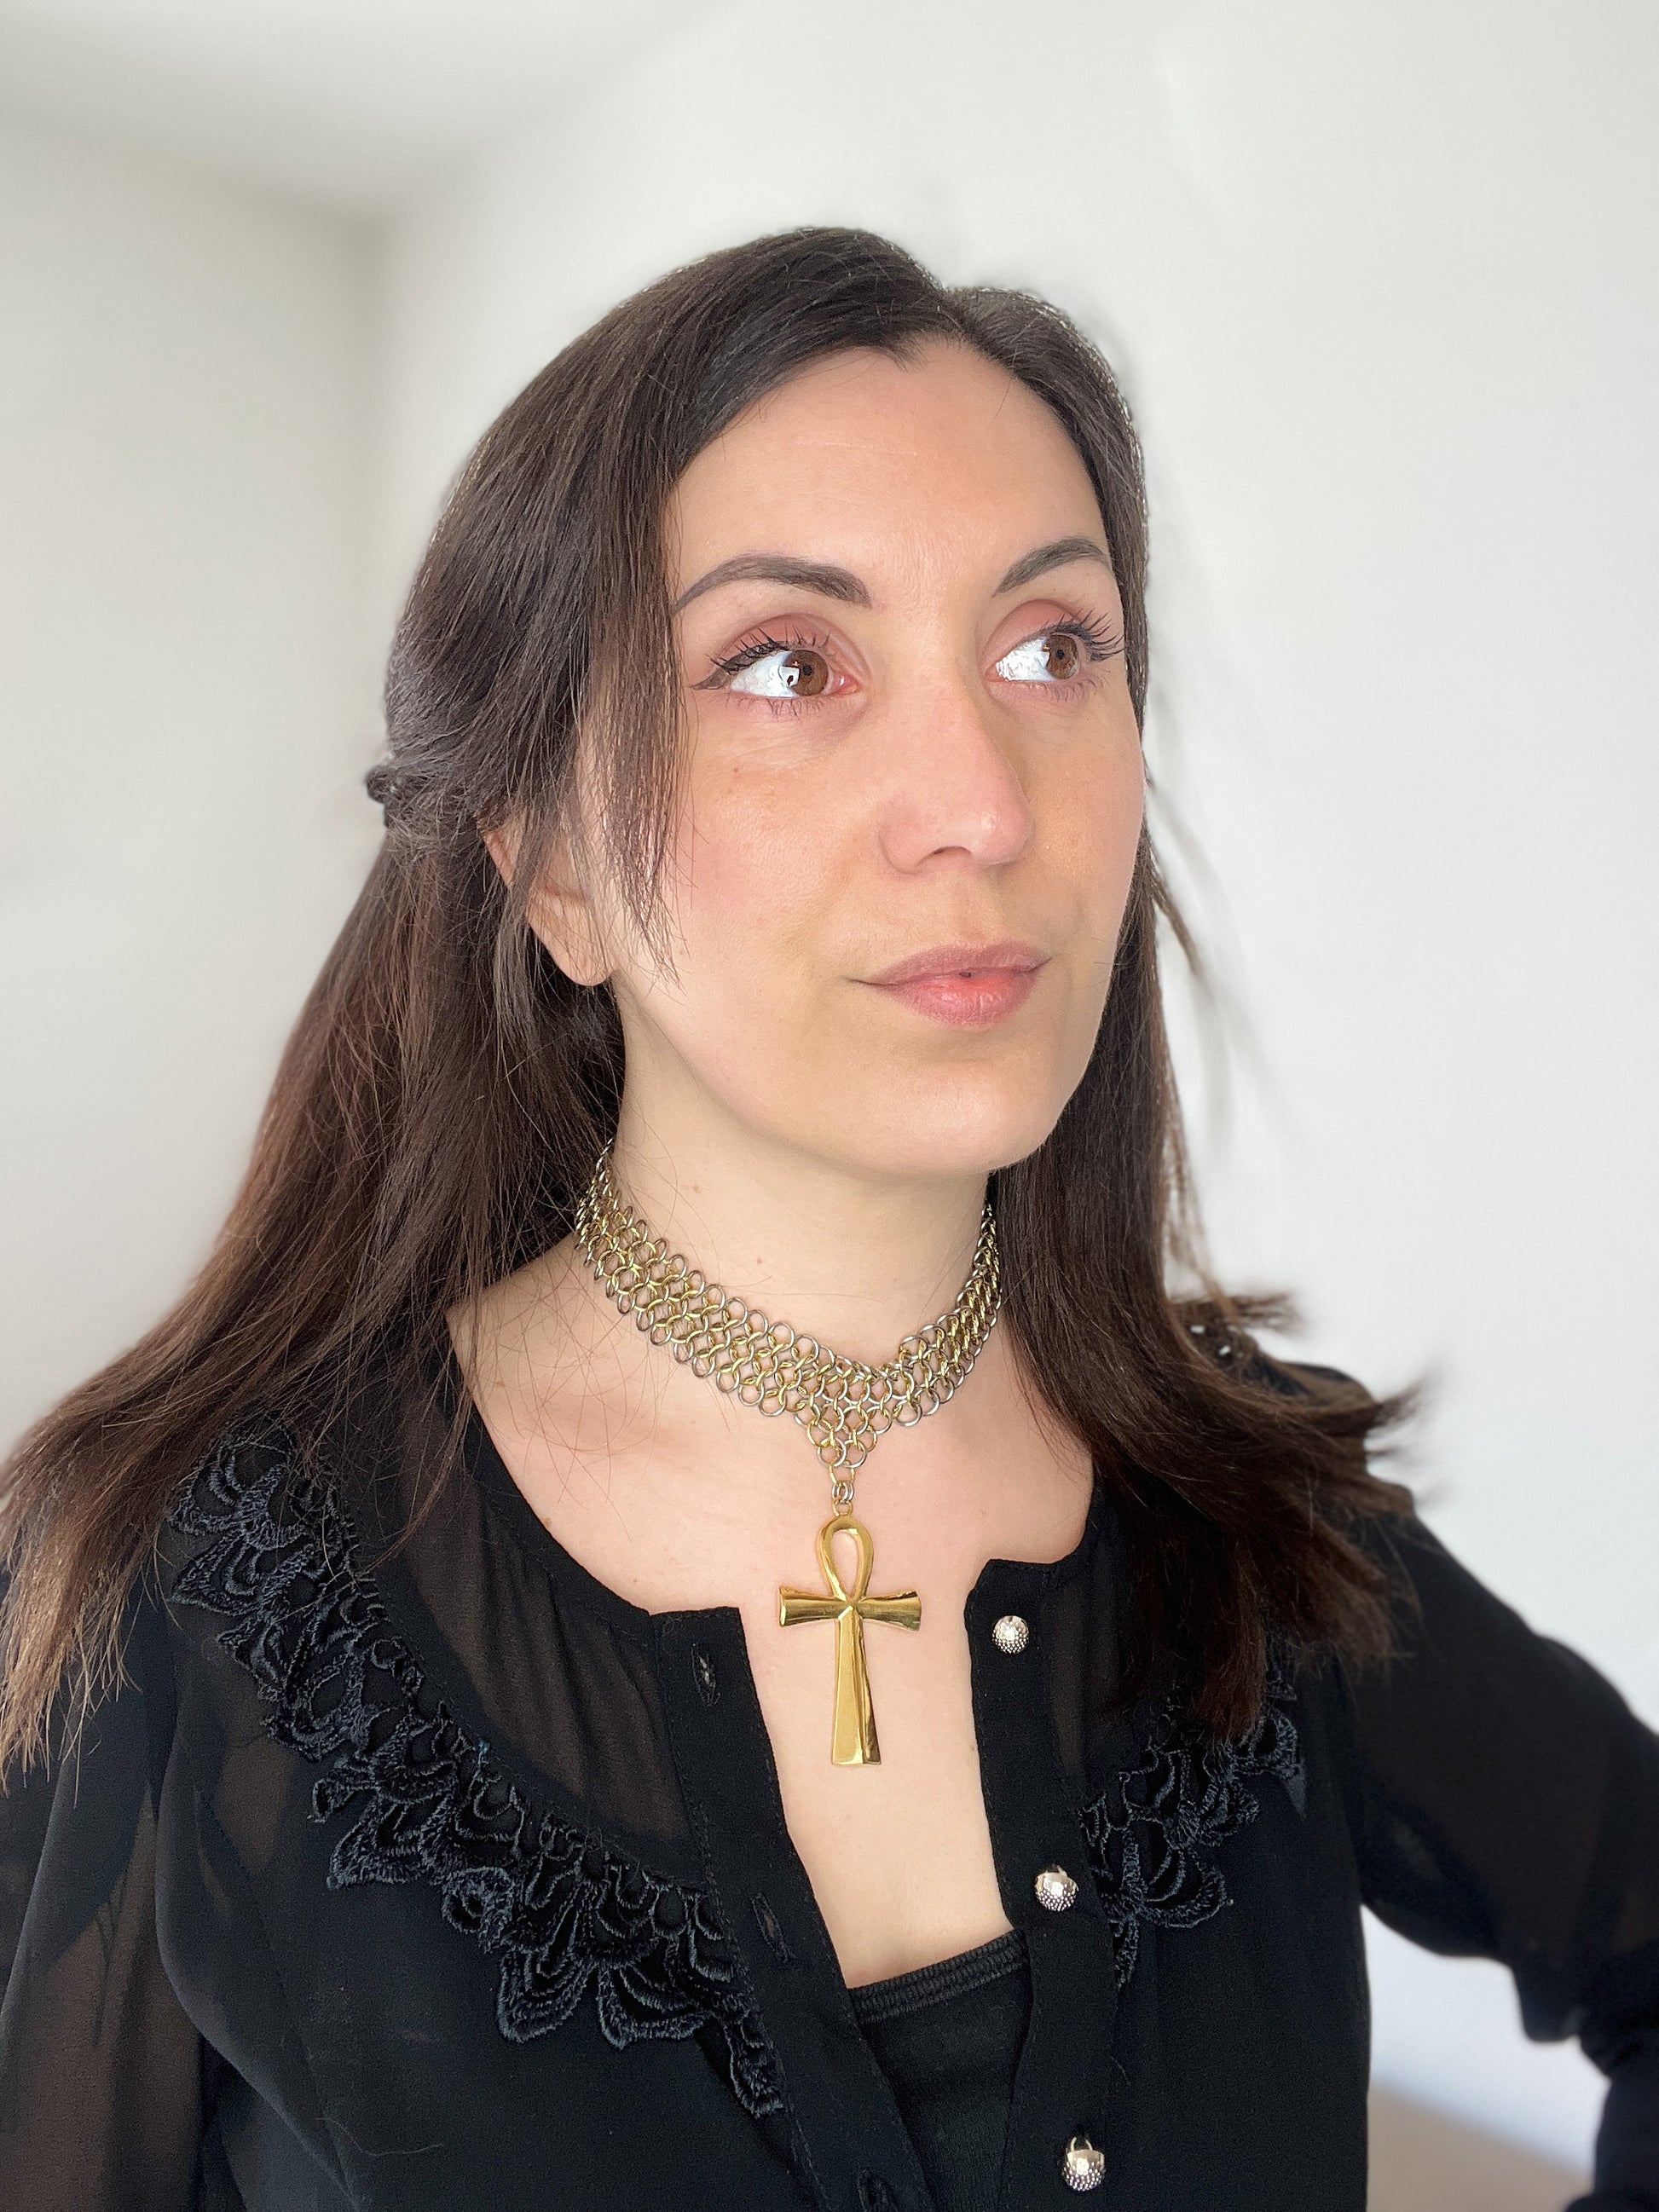 Ankh chainmail choker European 4 in 1 stainless steel and 18k gold plated necklace Baguette Magick